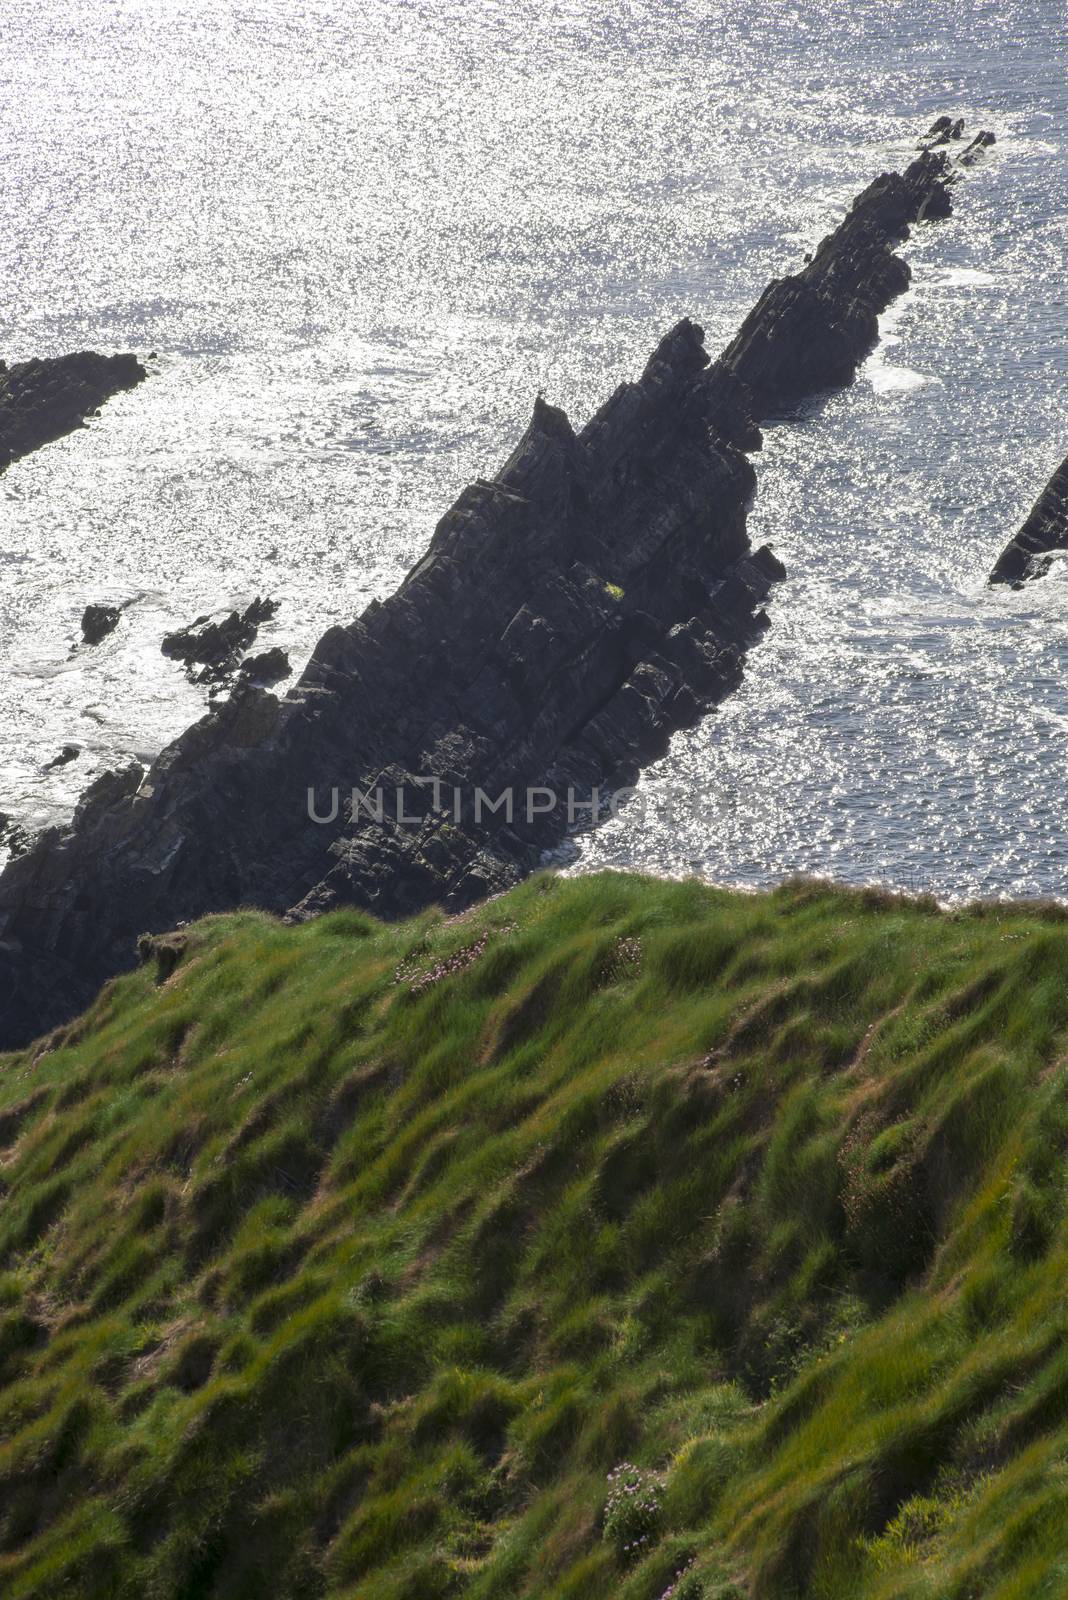 rocky jagged coastline and cliffs in county kerry ireland on the wild atlantic way